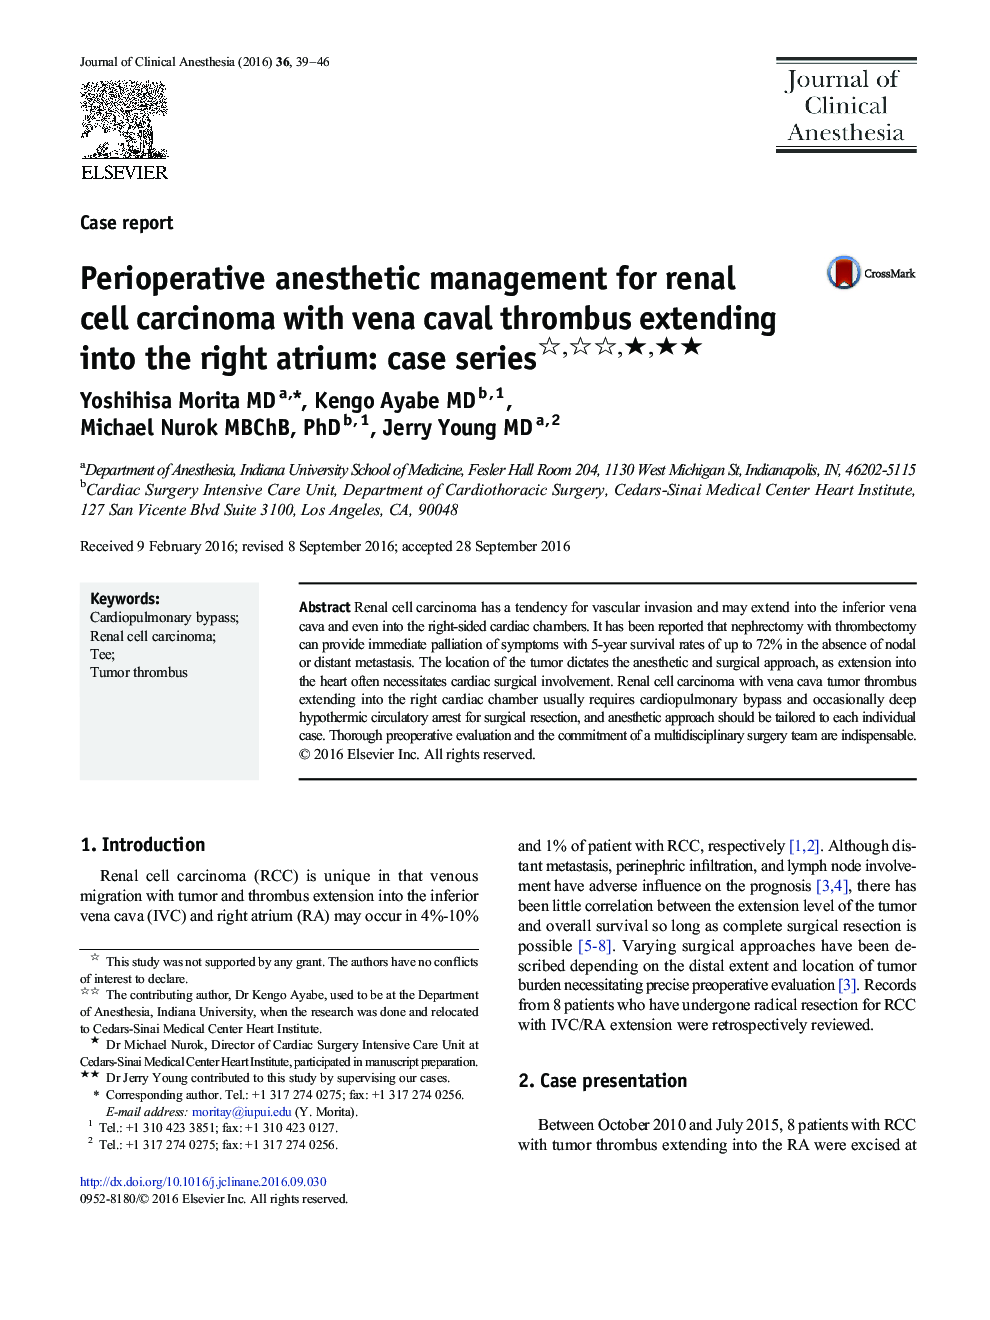 Perioperative anesthetic management for renal cell carcinoma with vena caval thrombus extending into the right atrium: case series